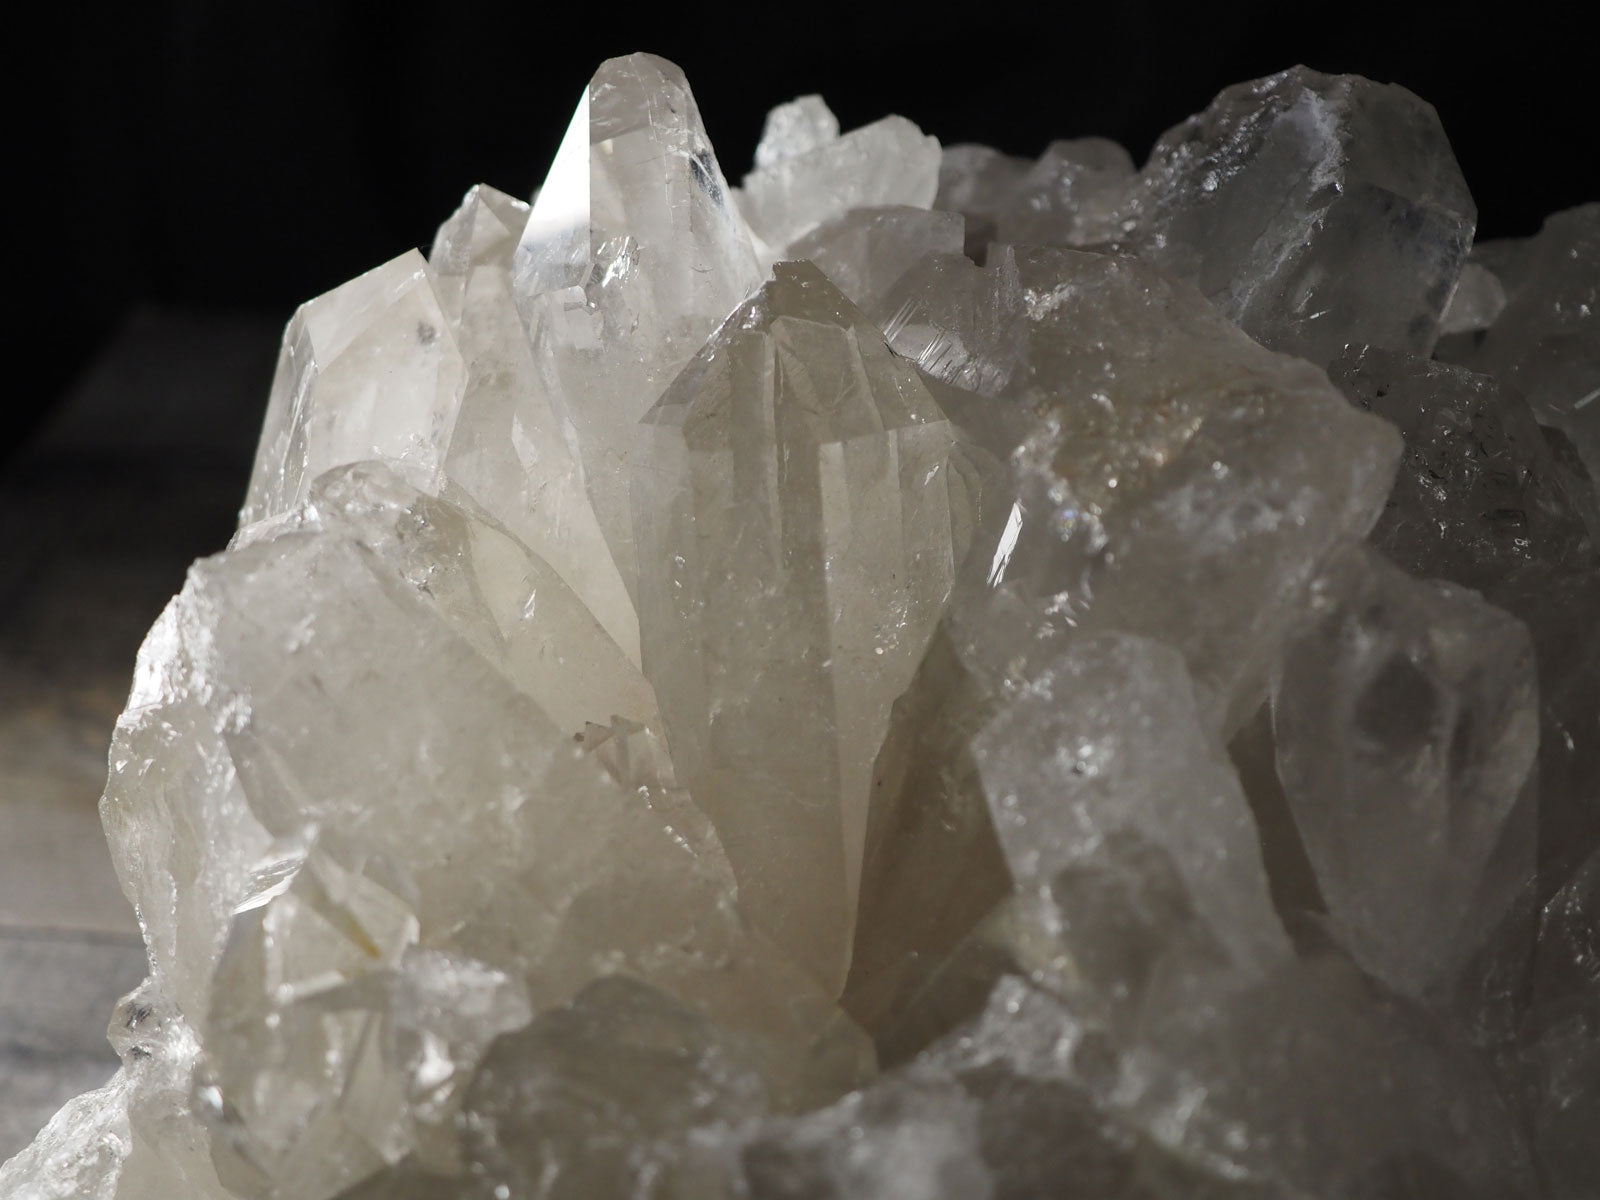 Giant Brazilian quartz cluster that is almost 11" wide and 6.5" tall - Closeup